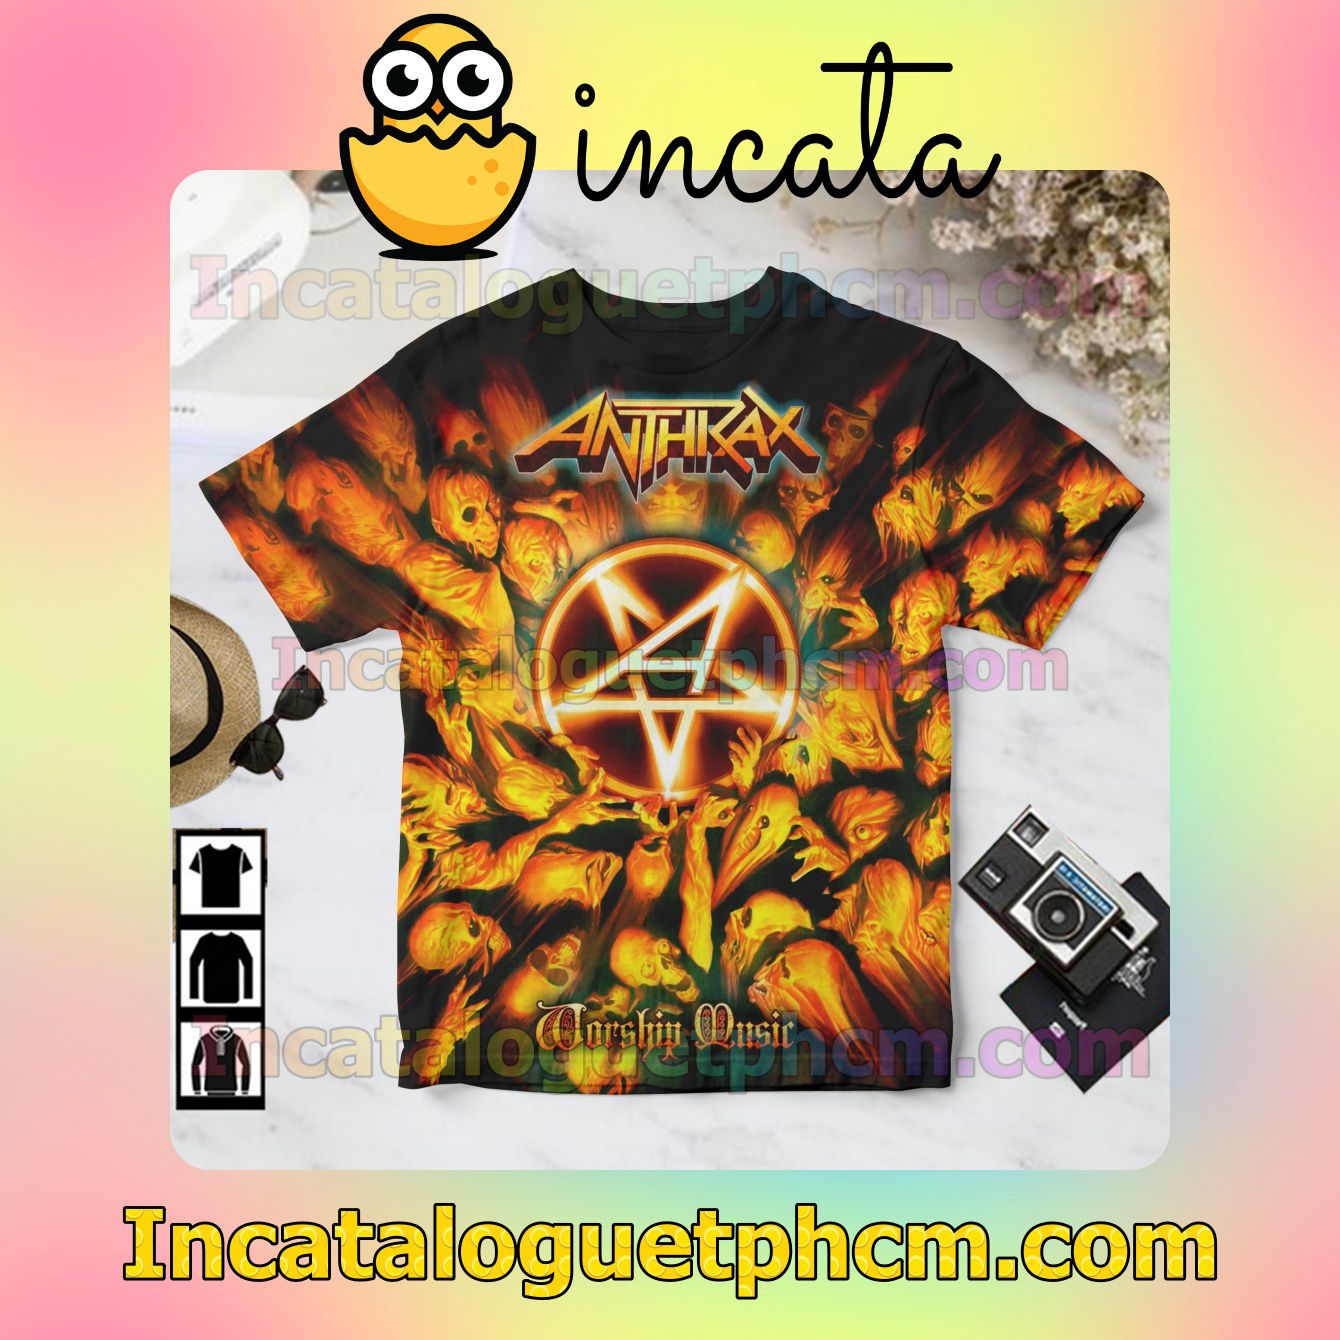 Worship Music Album Cover By Anthrax Gift Shirt